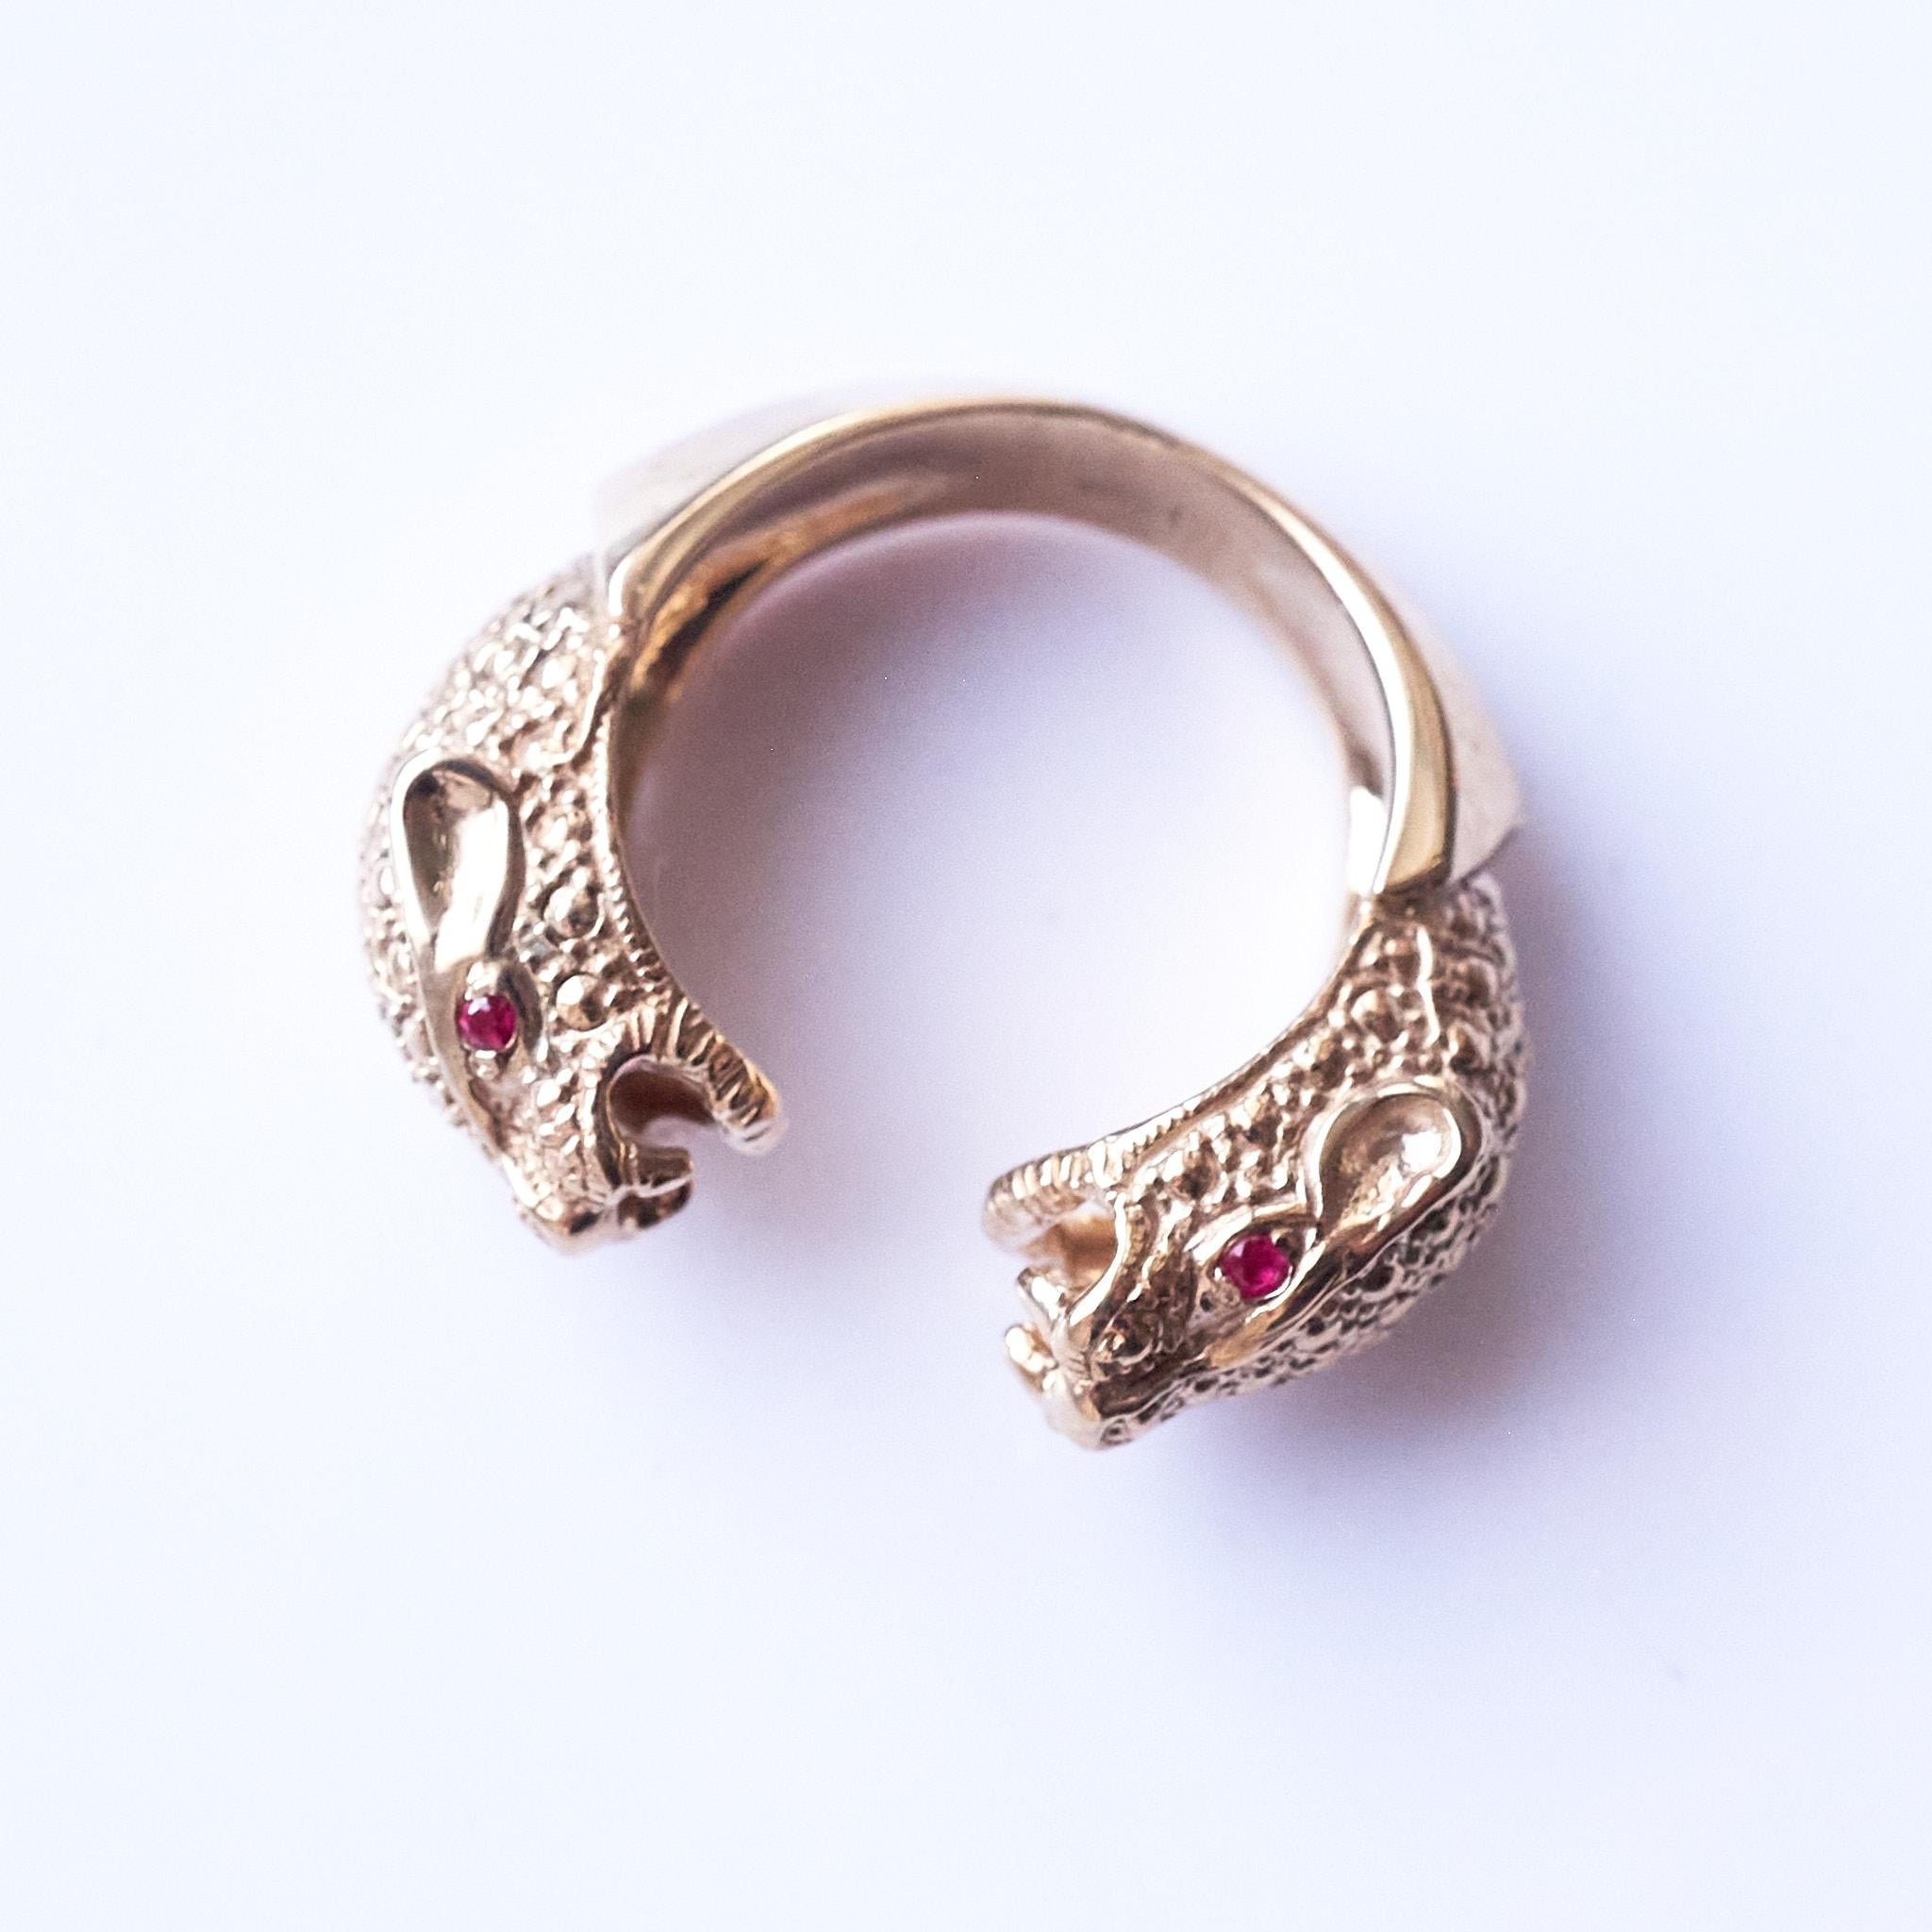 Brilliant Cut Ruby Jaguar Ring Bronze Animal Jewelry Cocktail Ring J Dauphin For Sale